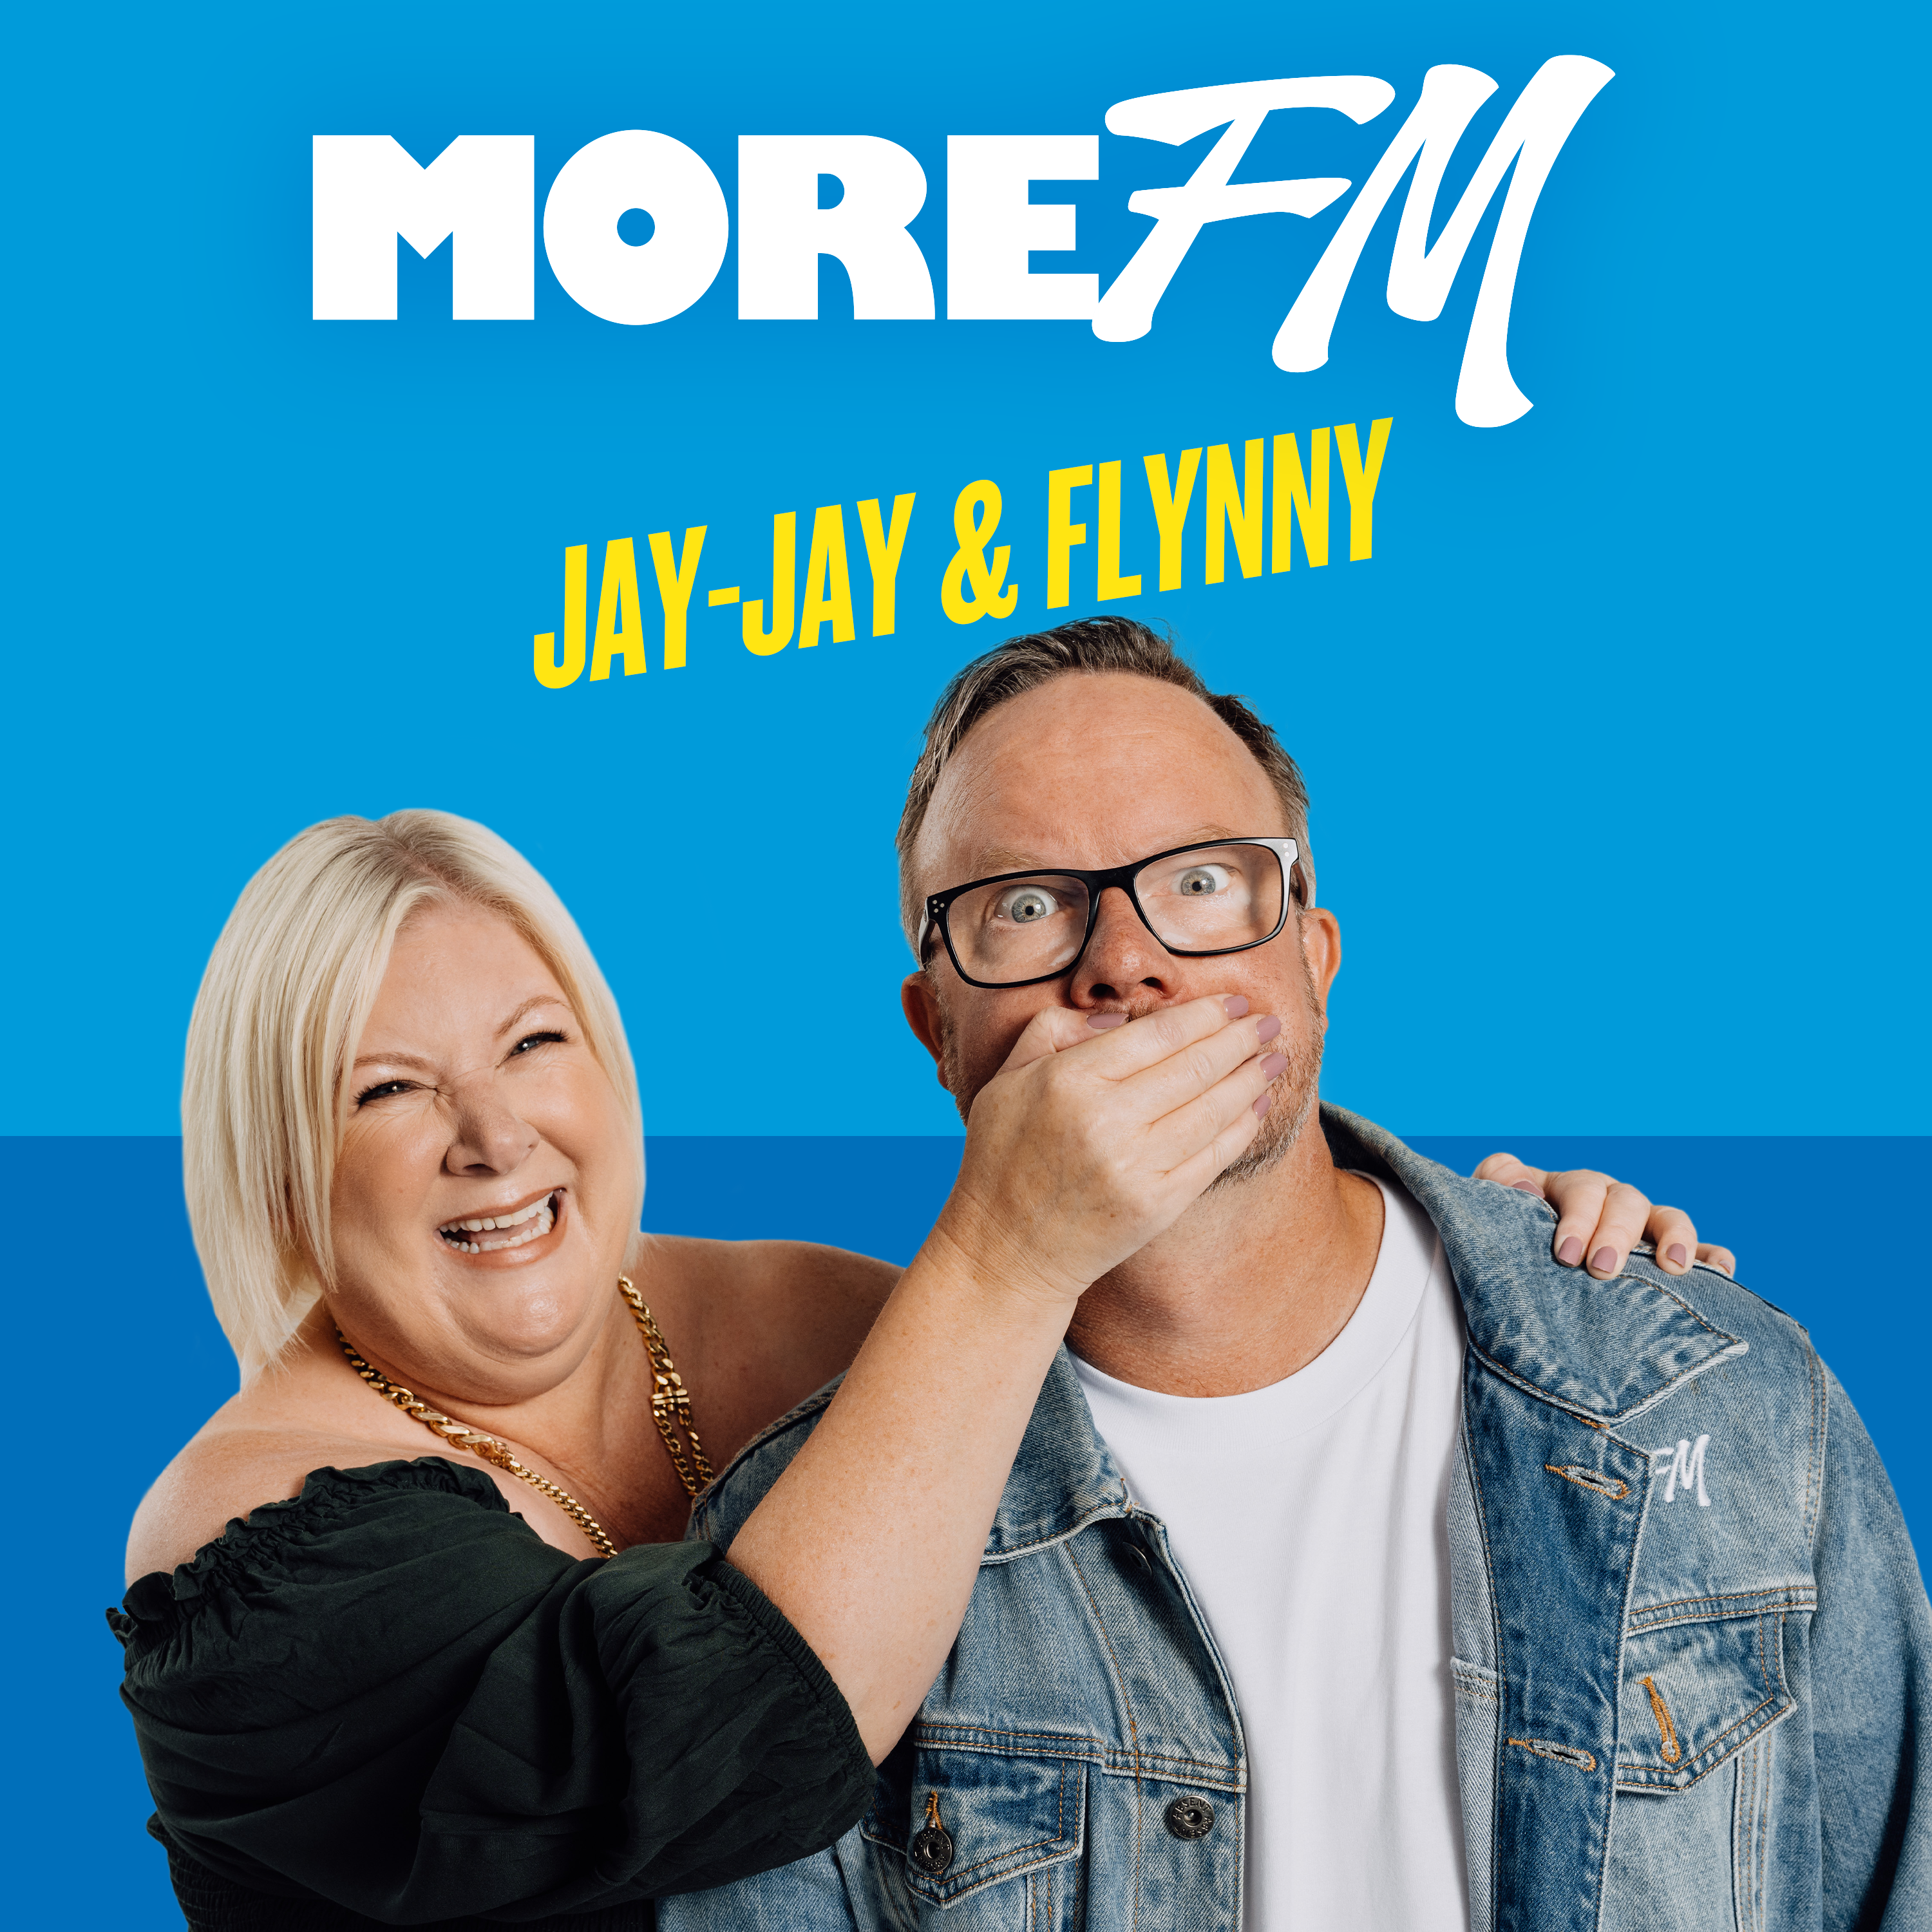 Full Show: Funny Relatable Yarns, Getting caught In Just Undies + More! Jay Jay & Flynny 18/04/24